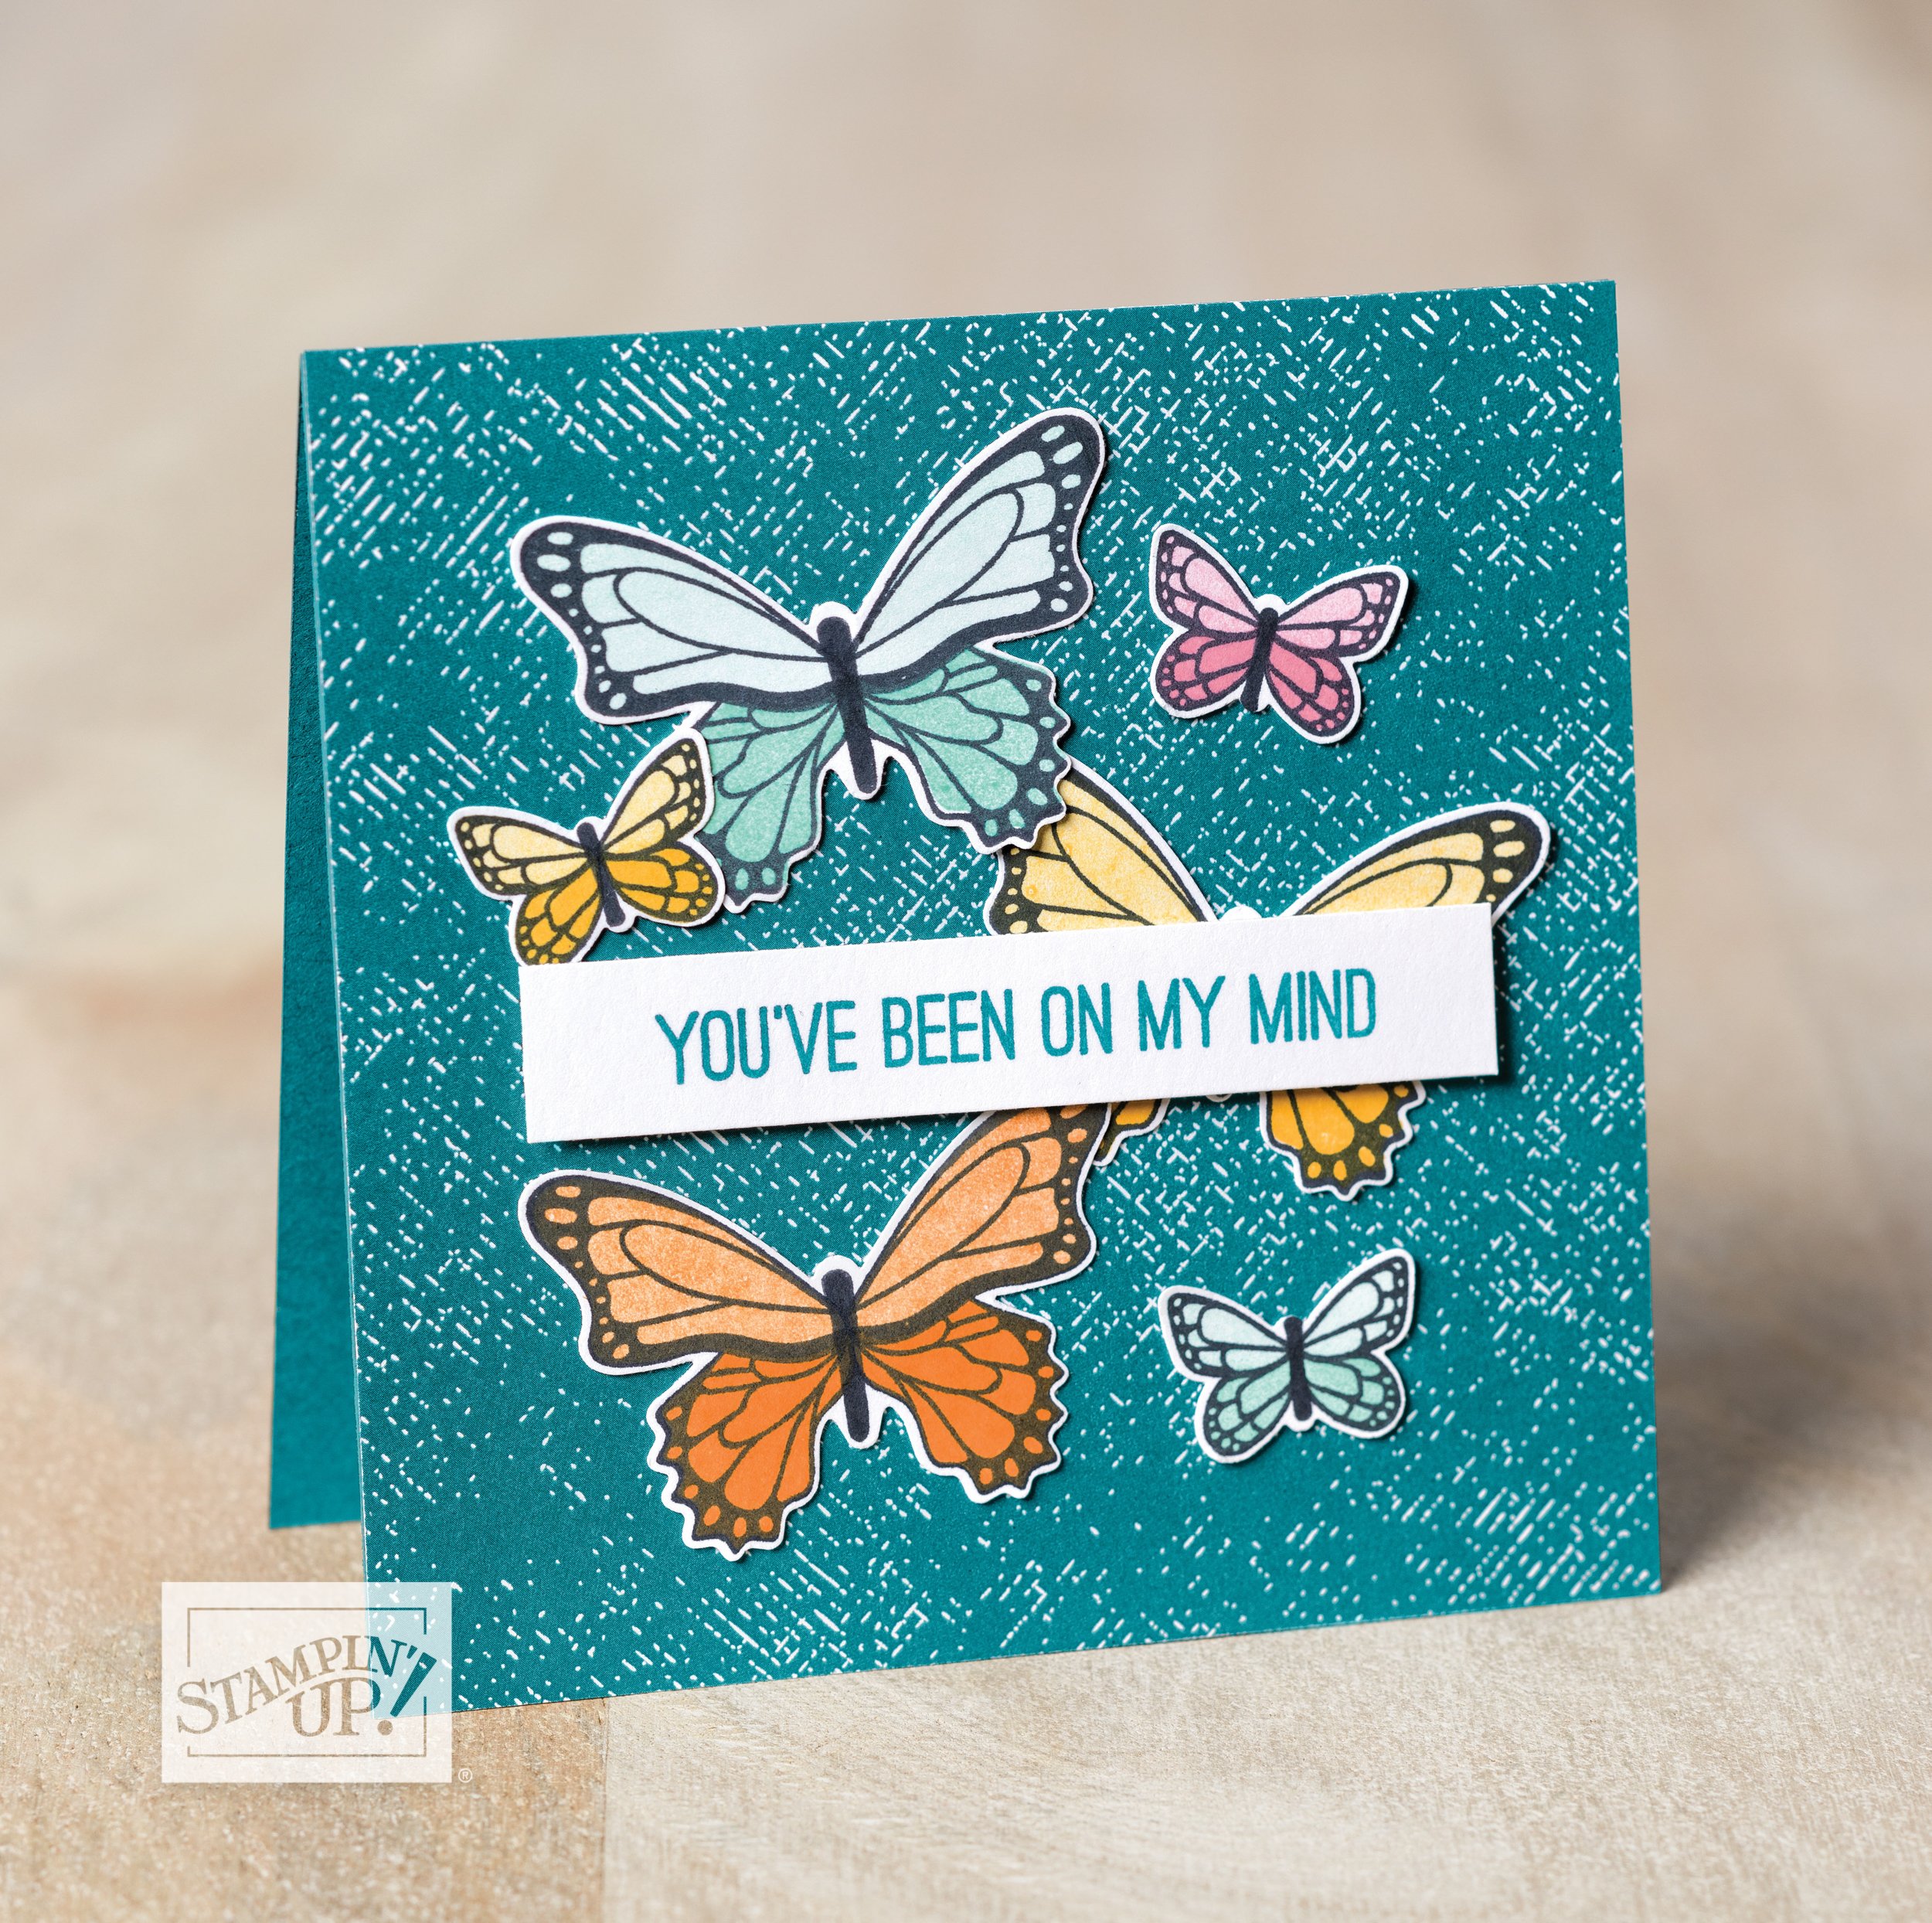 Product Spotlight – Stampin’ Up! Butterfly Gala & Only 4 Days Left of Promotion!